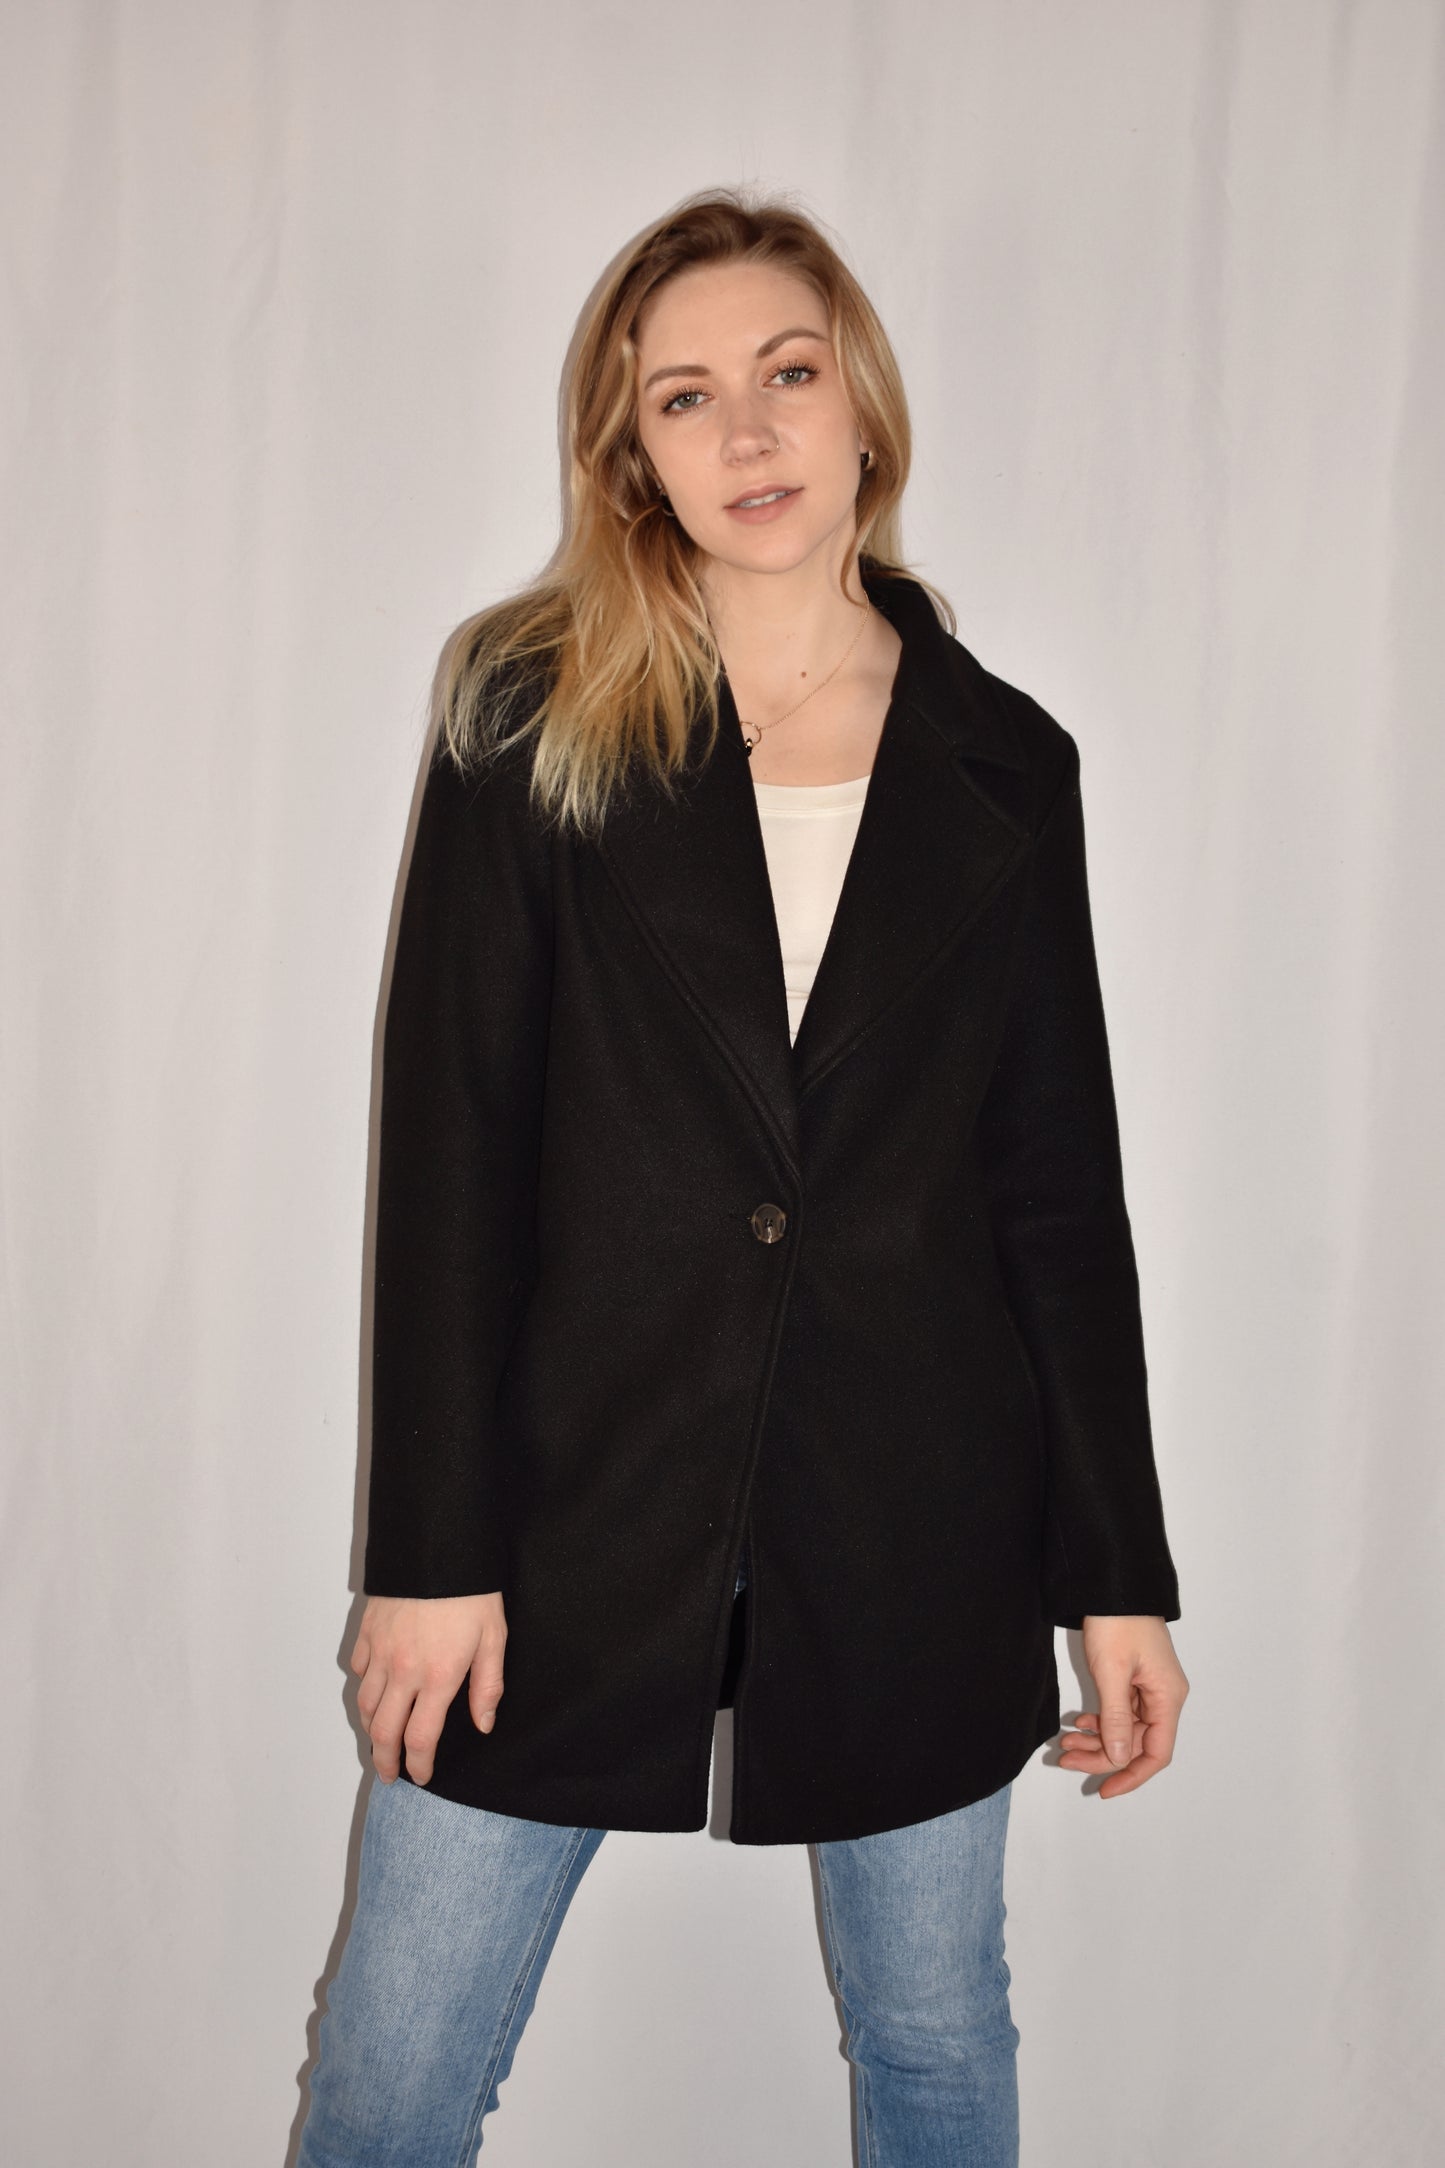 classic pea coat with side pockets, one button enclosure, hip length.